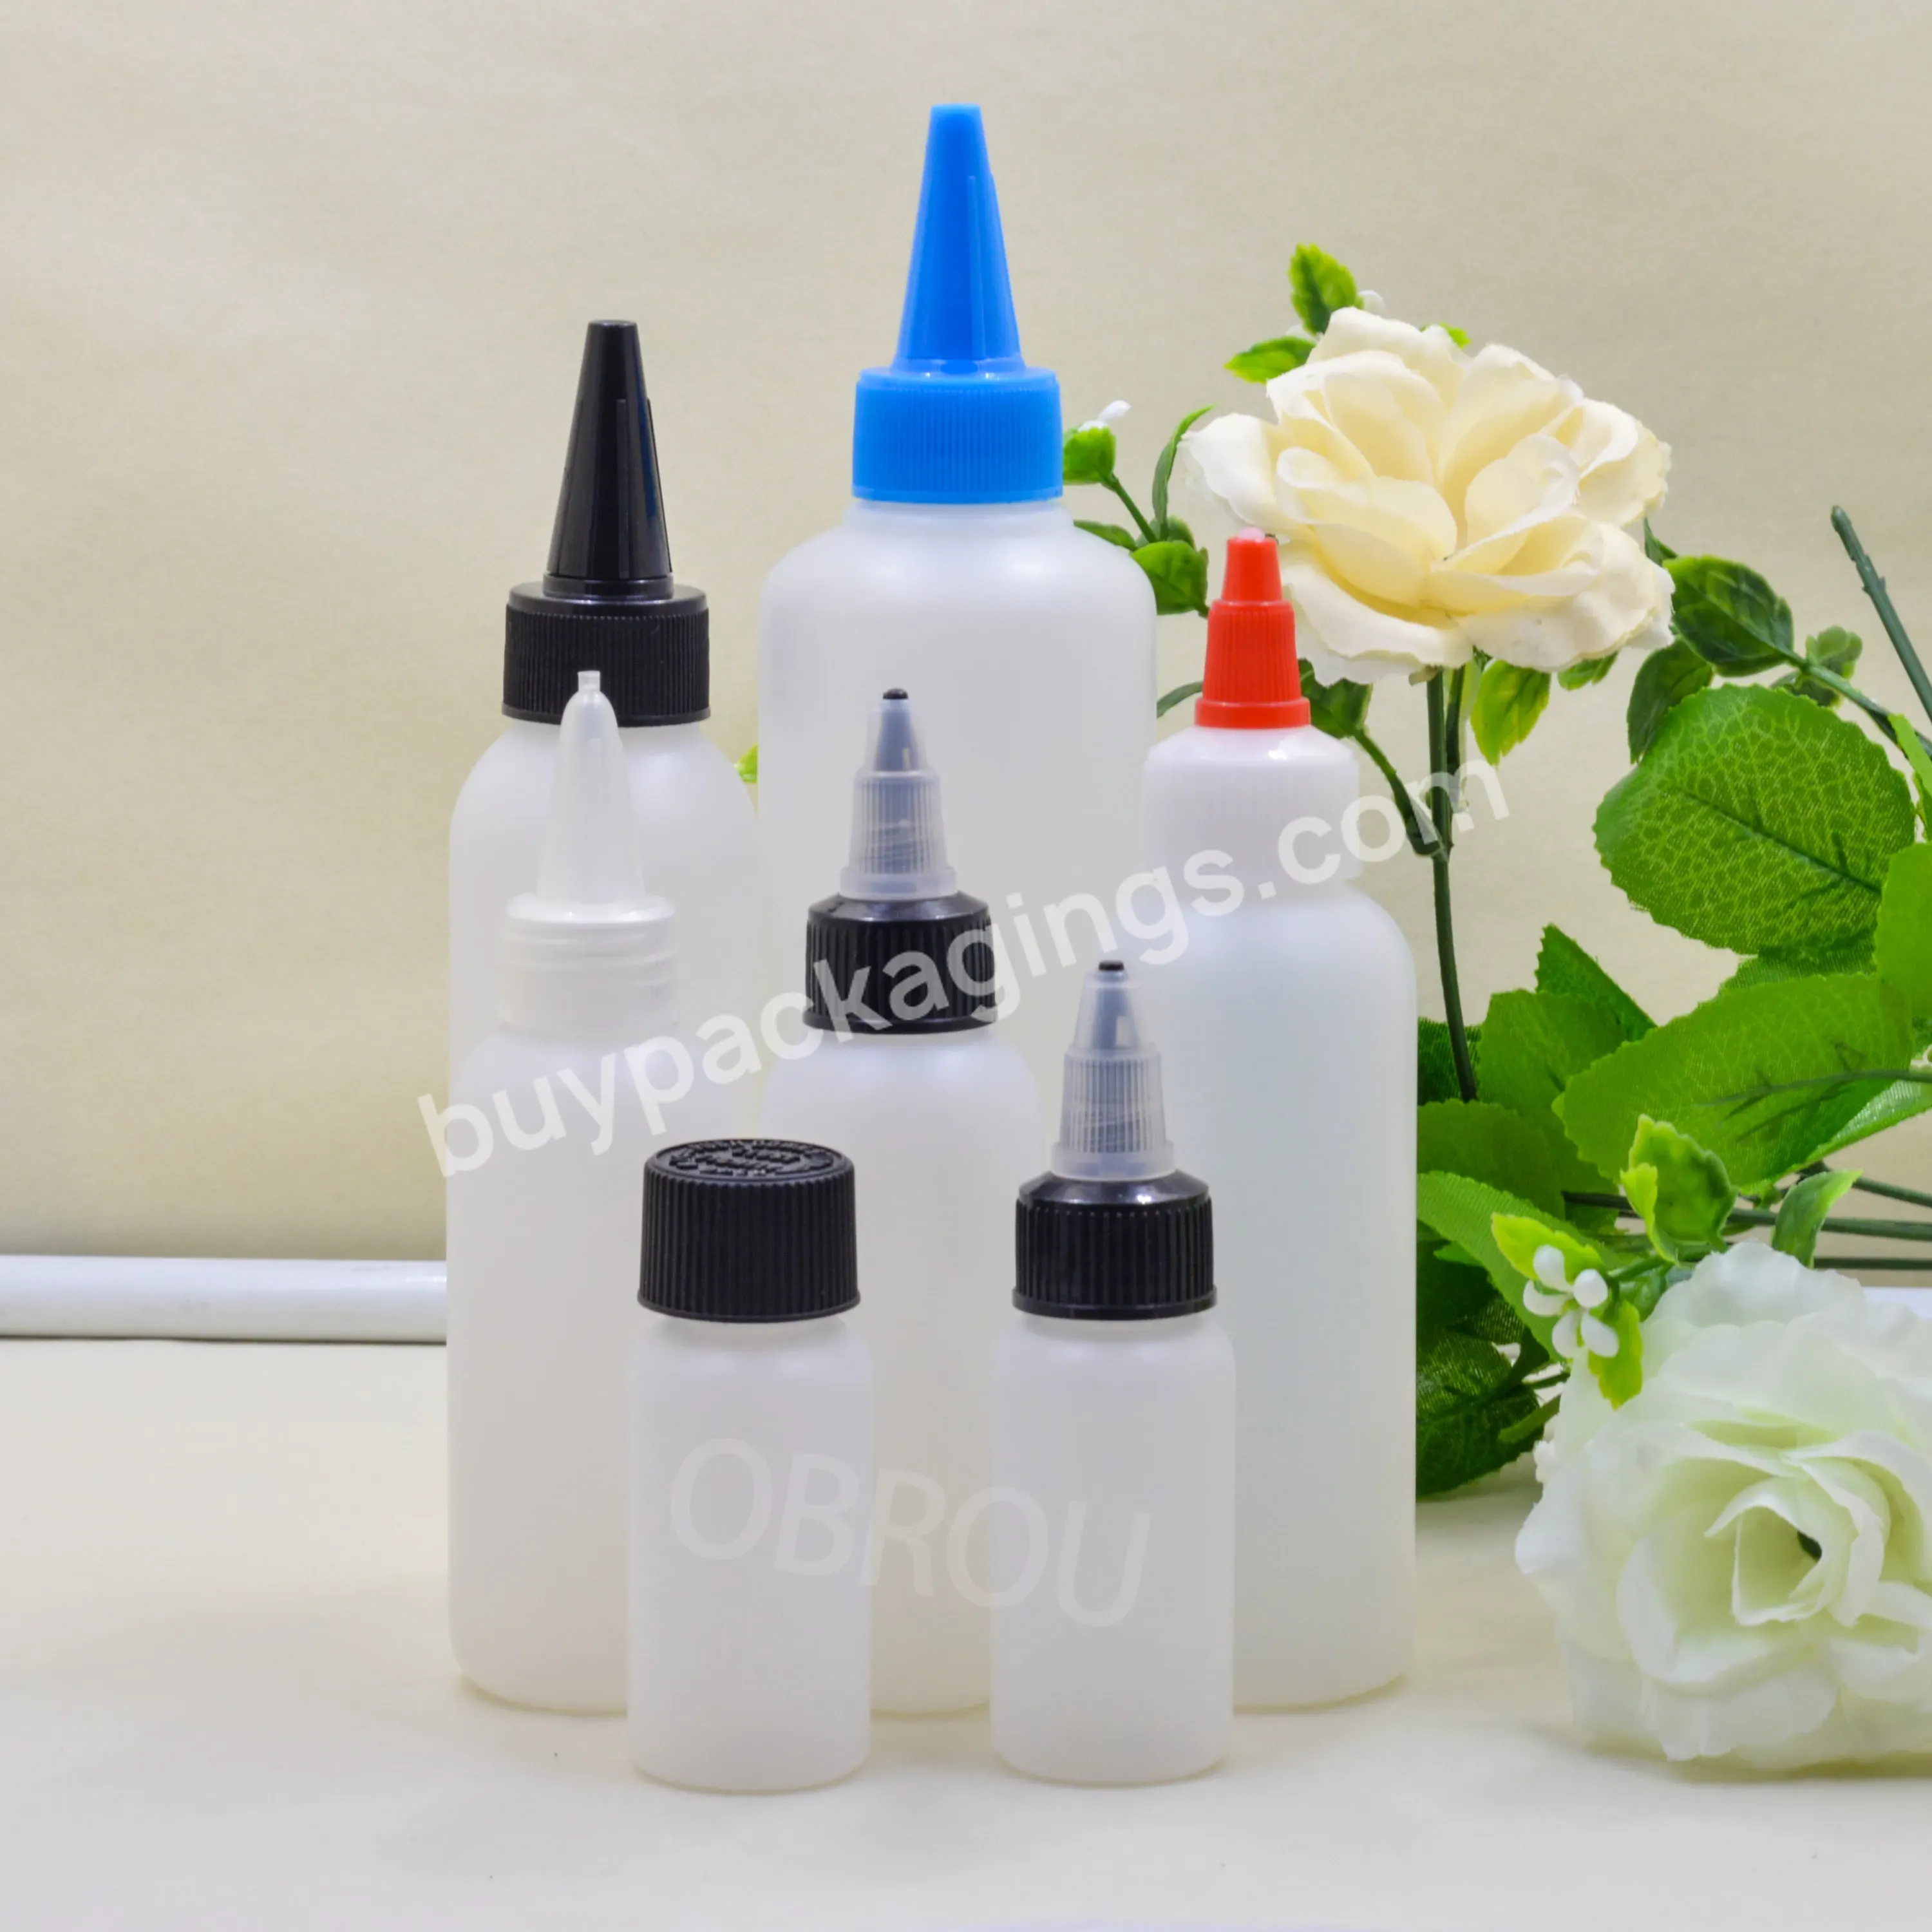 Obrou 30ml 60ml 100ml 120ml 250ml Squeezable Plastic Dropper Bottle With Twist Cap For Cosmetic Essential Oil - Buy 250ml Dropper Bottle,Cosmetic Bottle With Twist Cap,Plastic Bottle For Essential Oil.